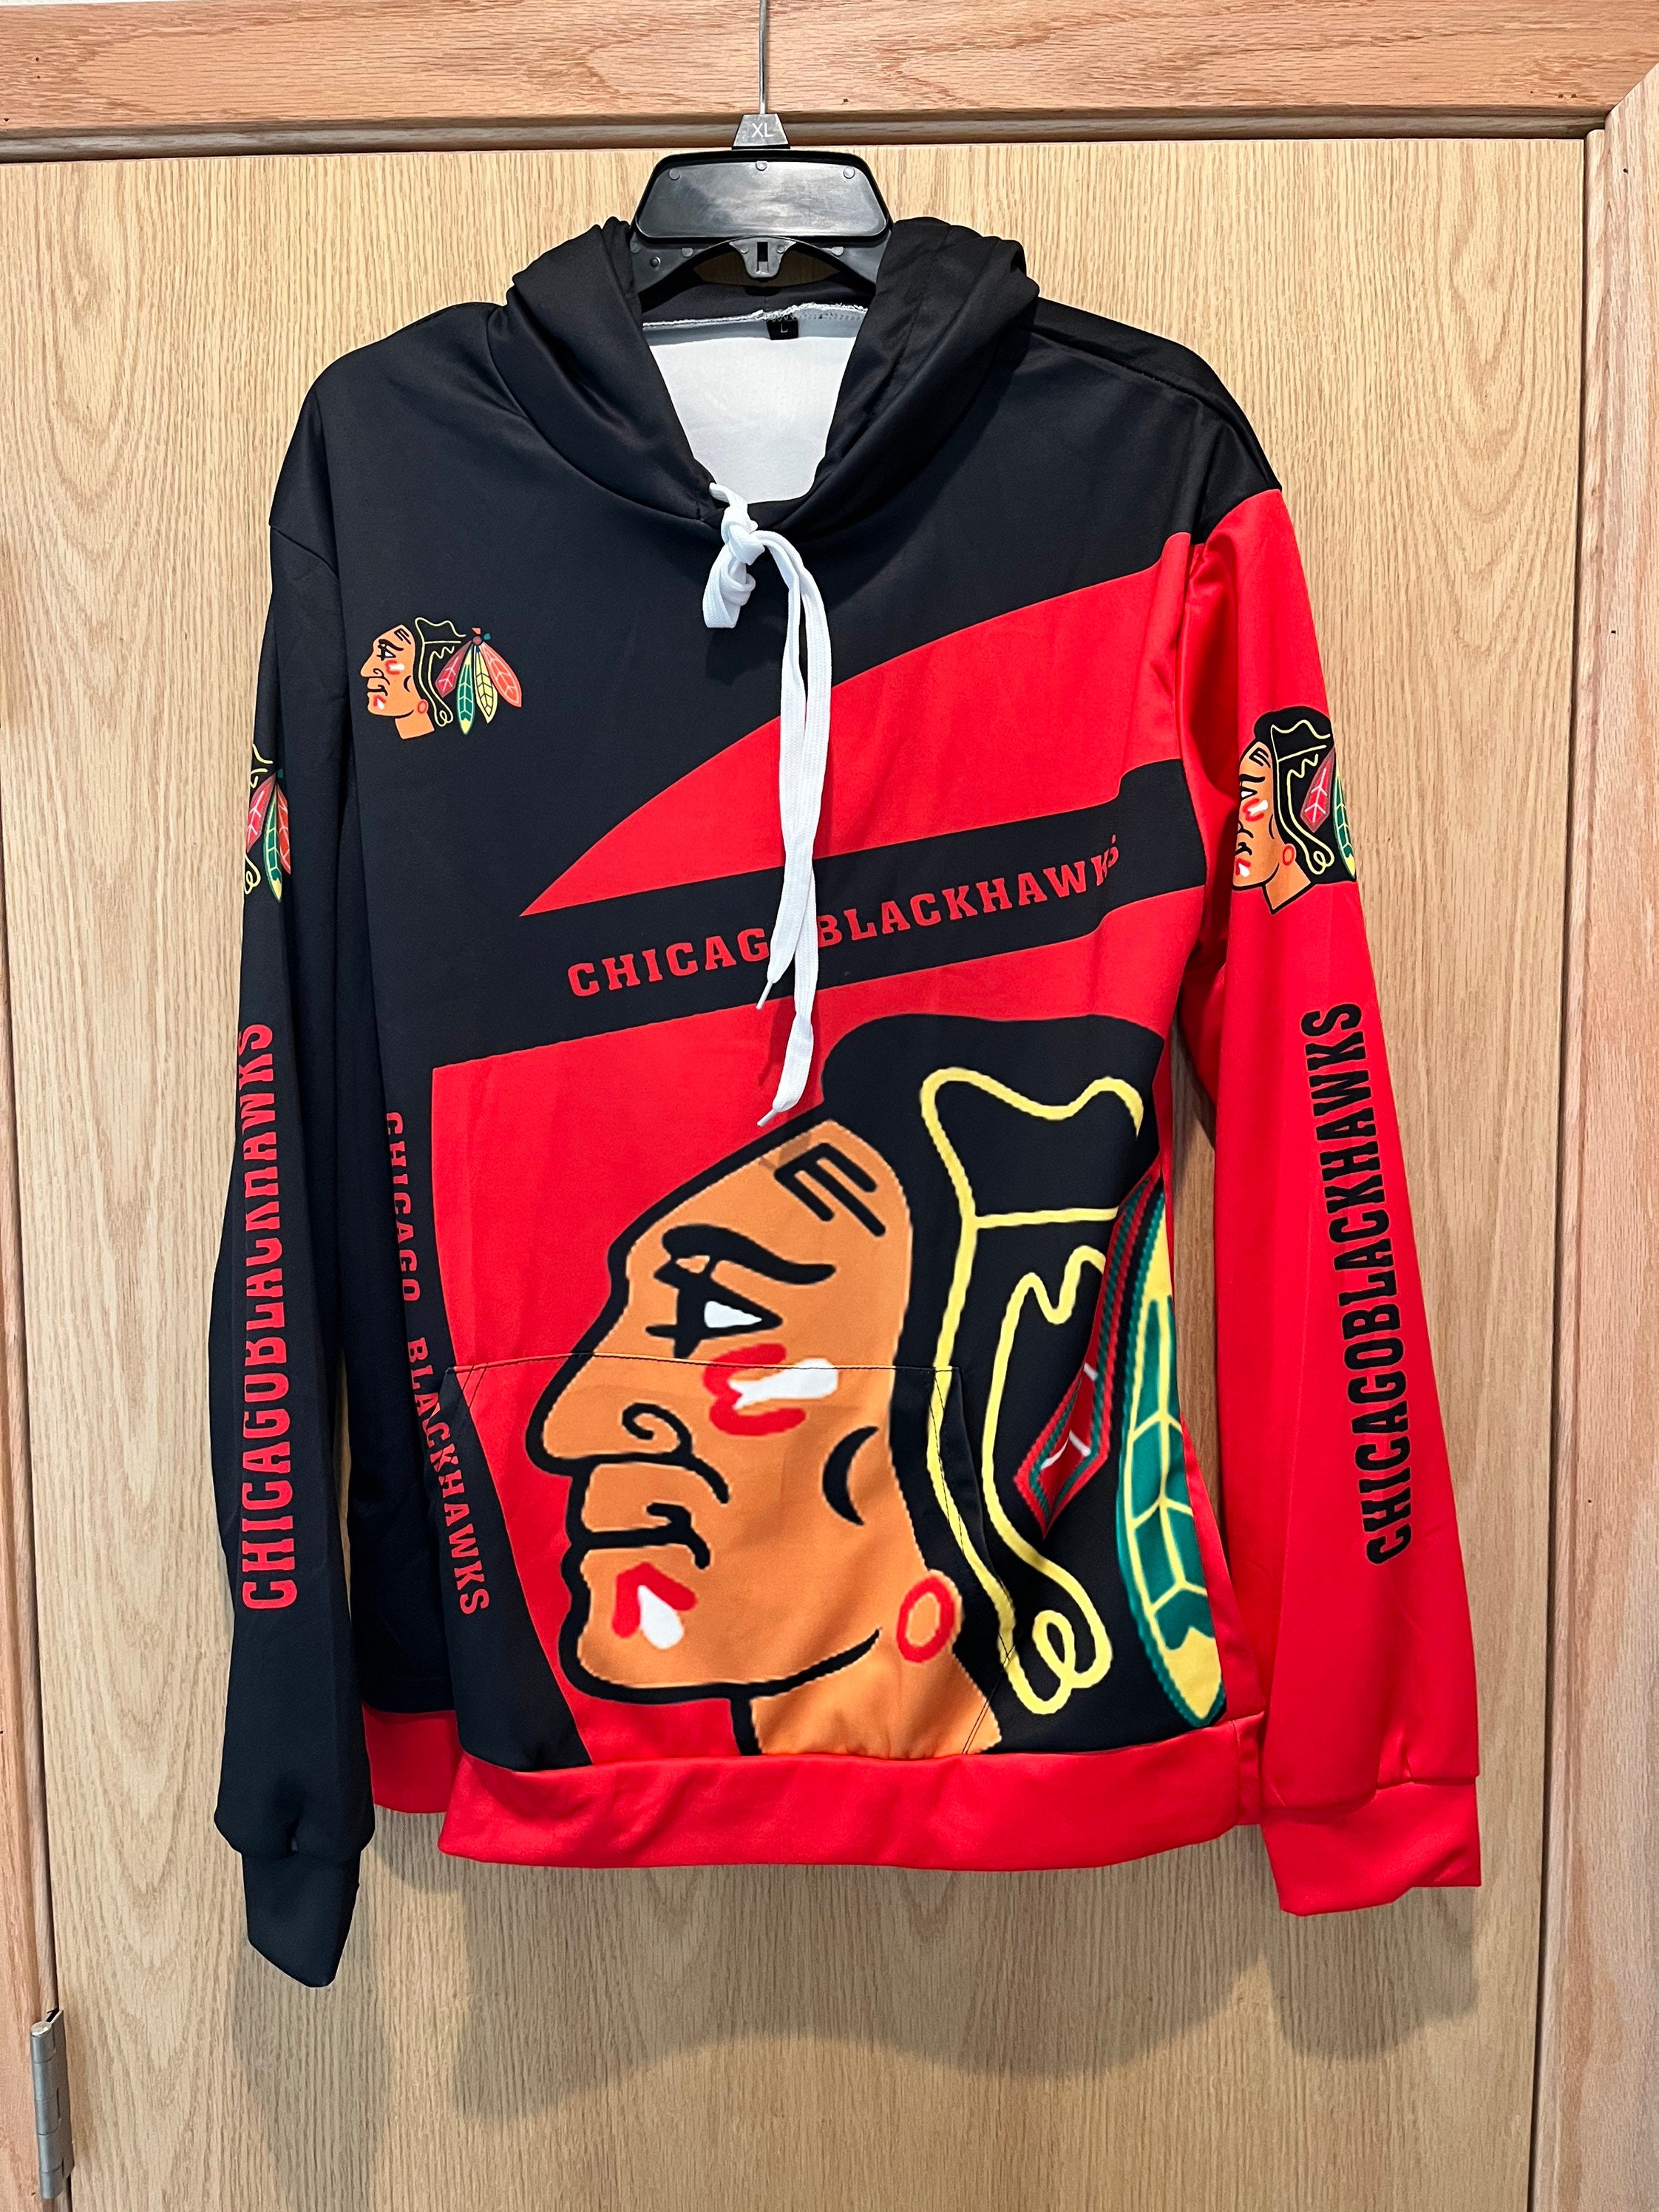 Chicago Blackhawks Gifts & Merchandise for Sale